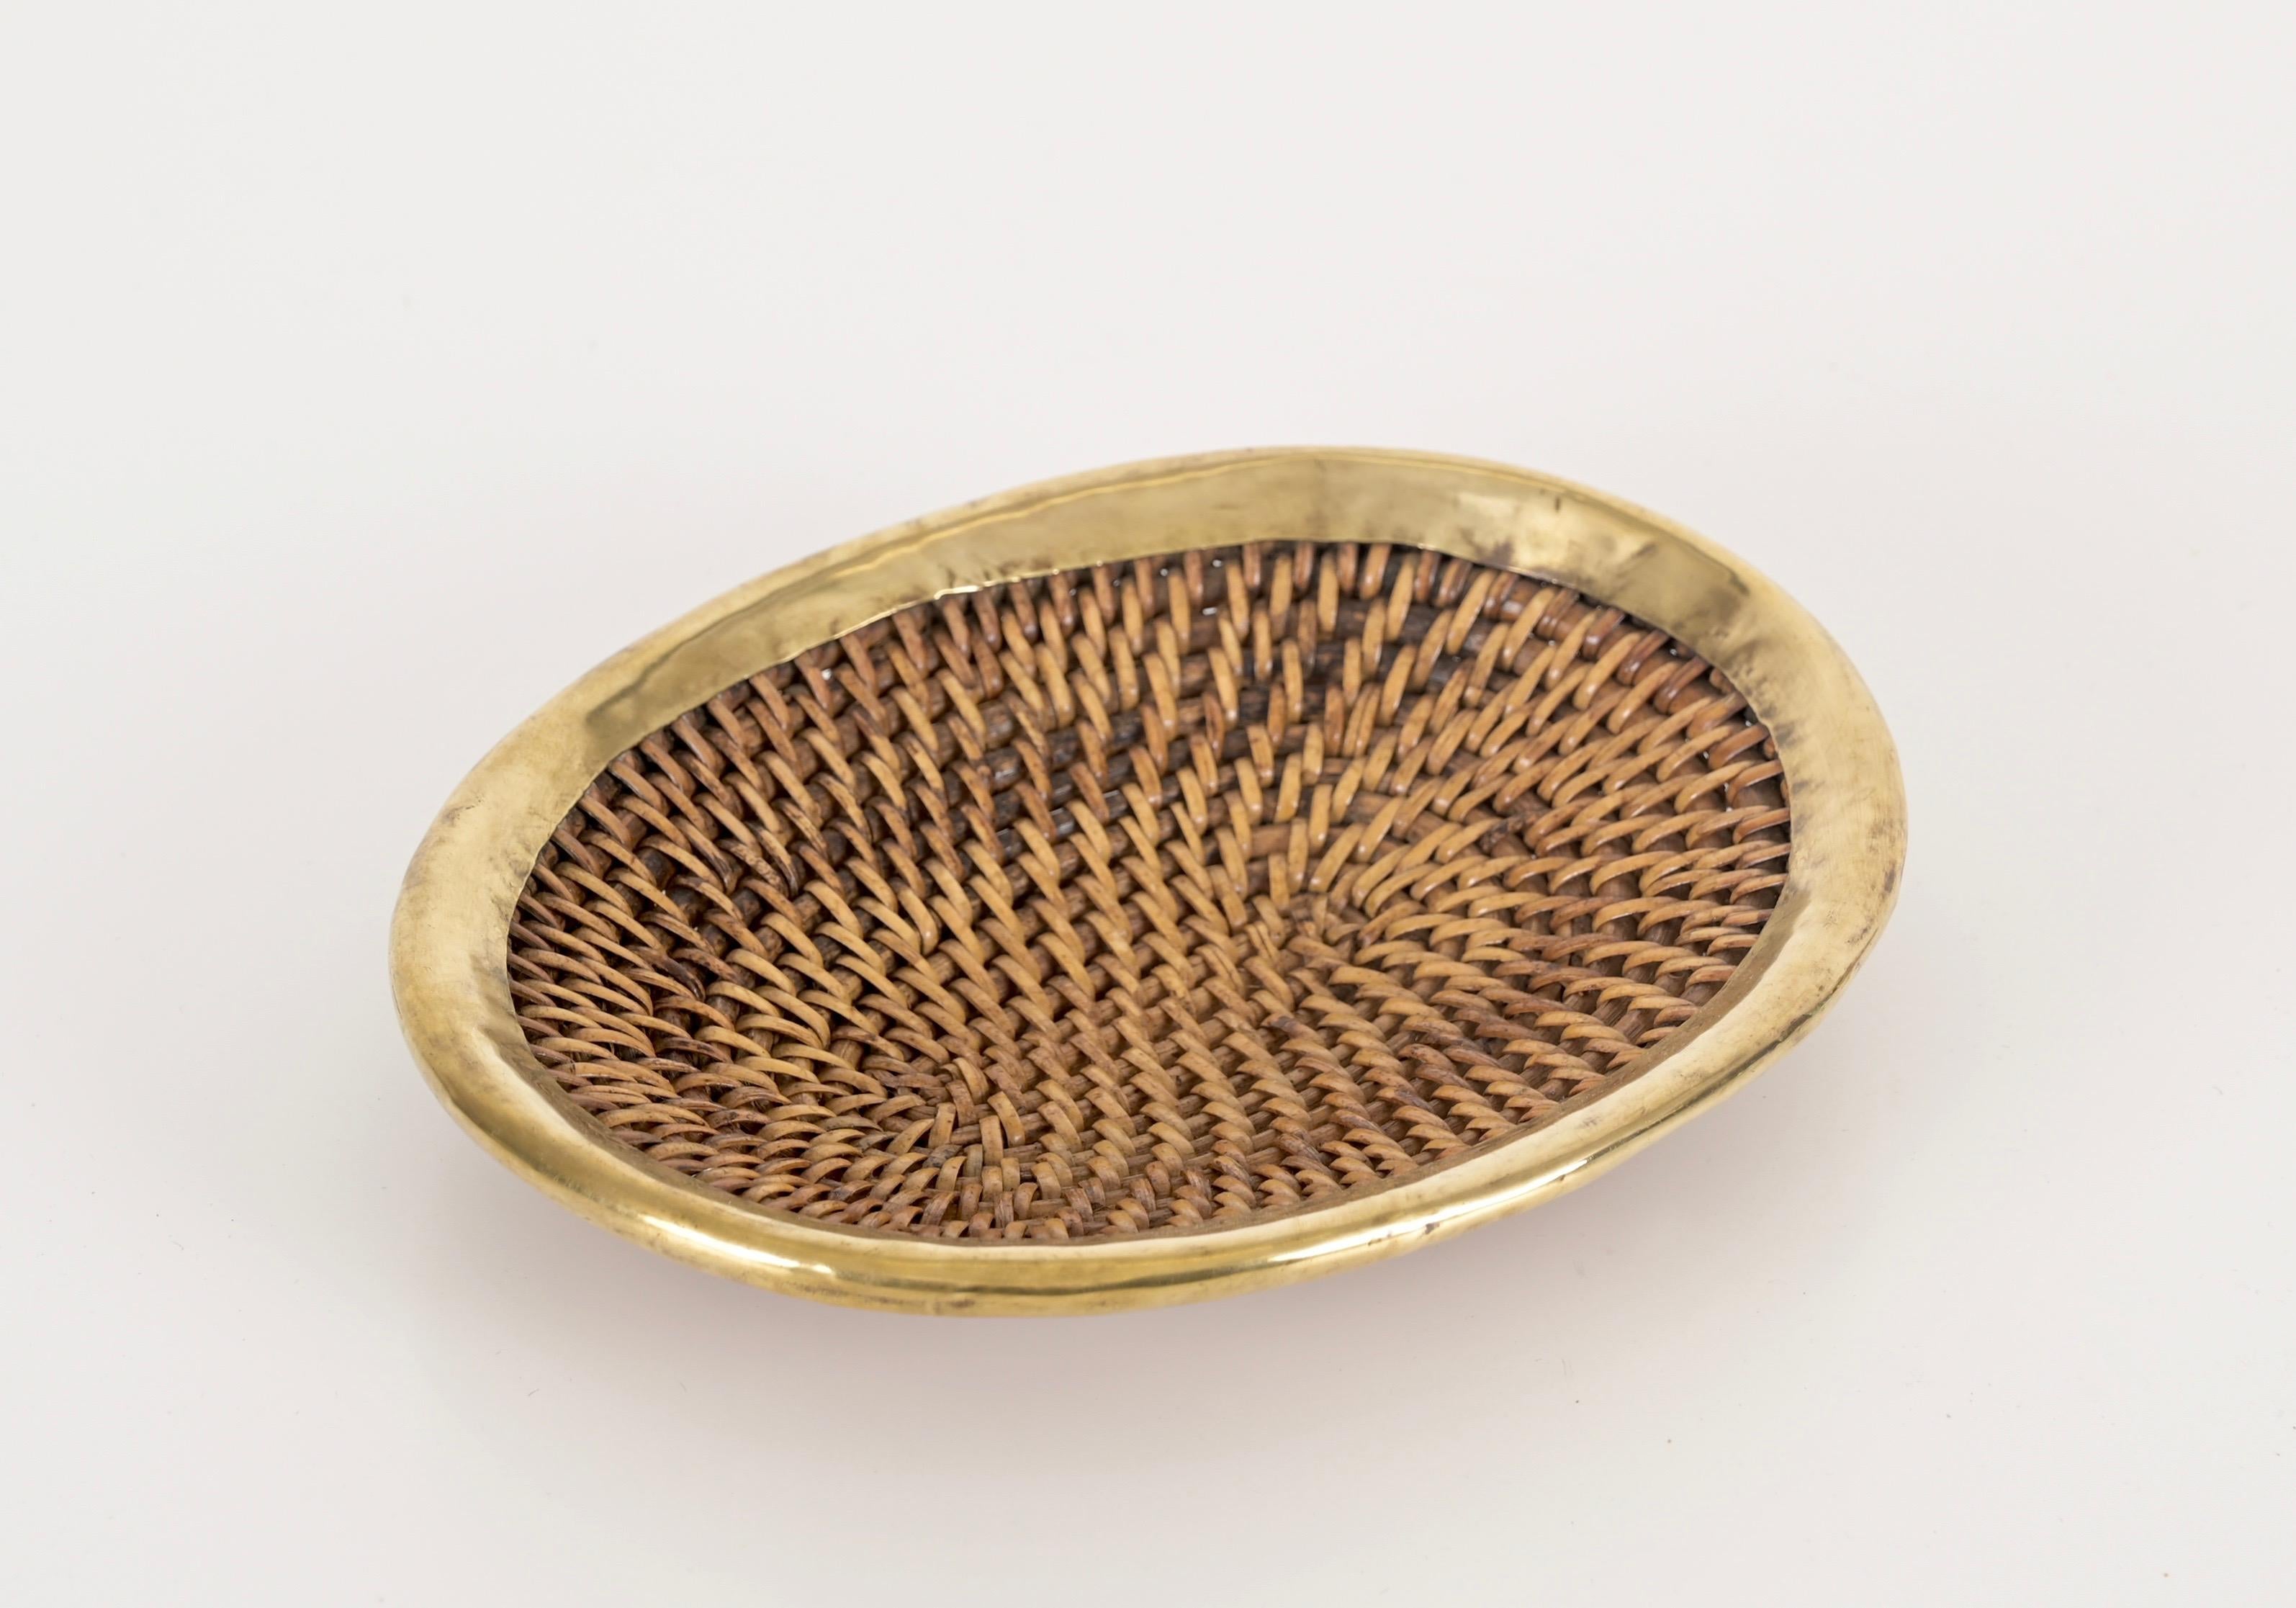 20th Century French Riviera Vide-Poche Bowl Tray in Woven Rattan and Brass, Italy 1970s For Sale